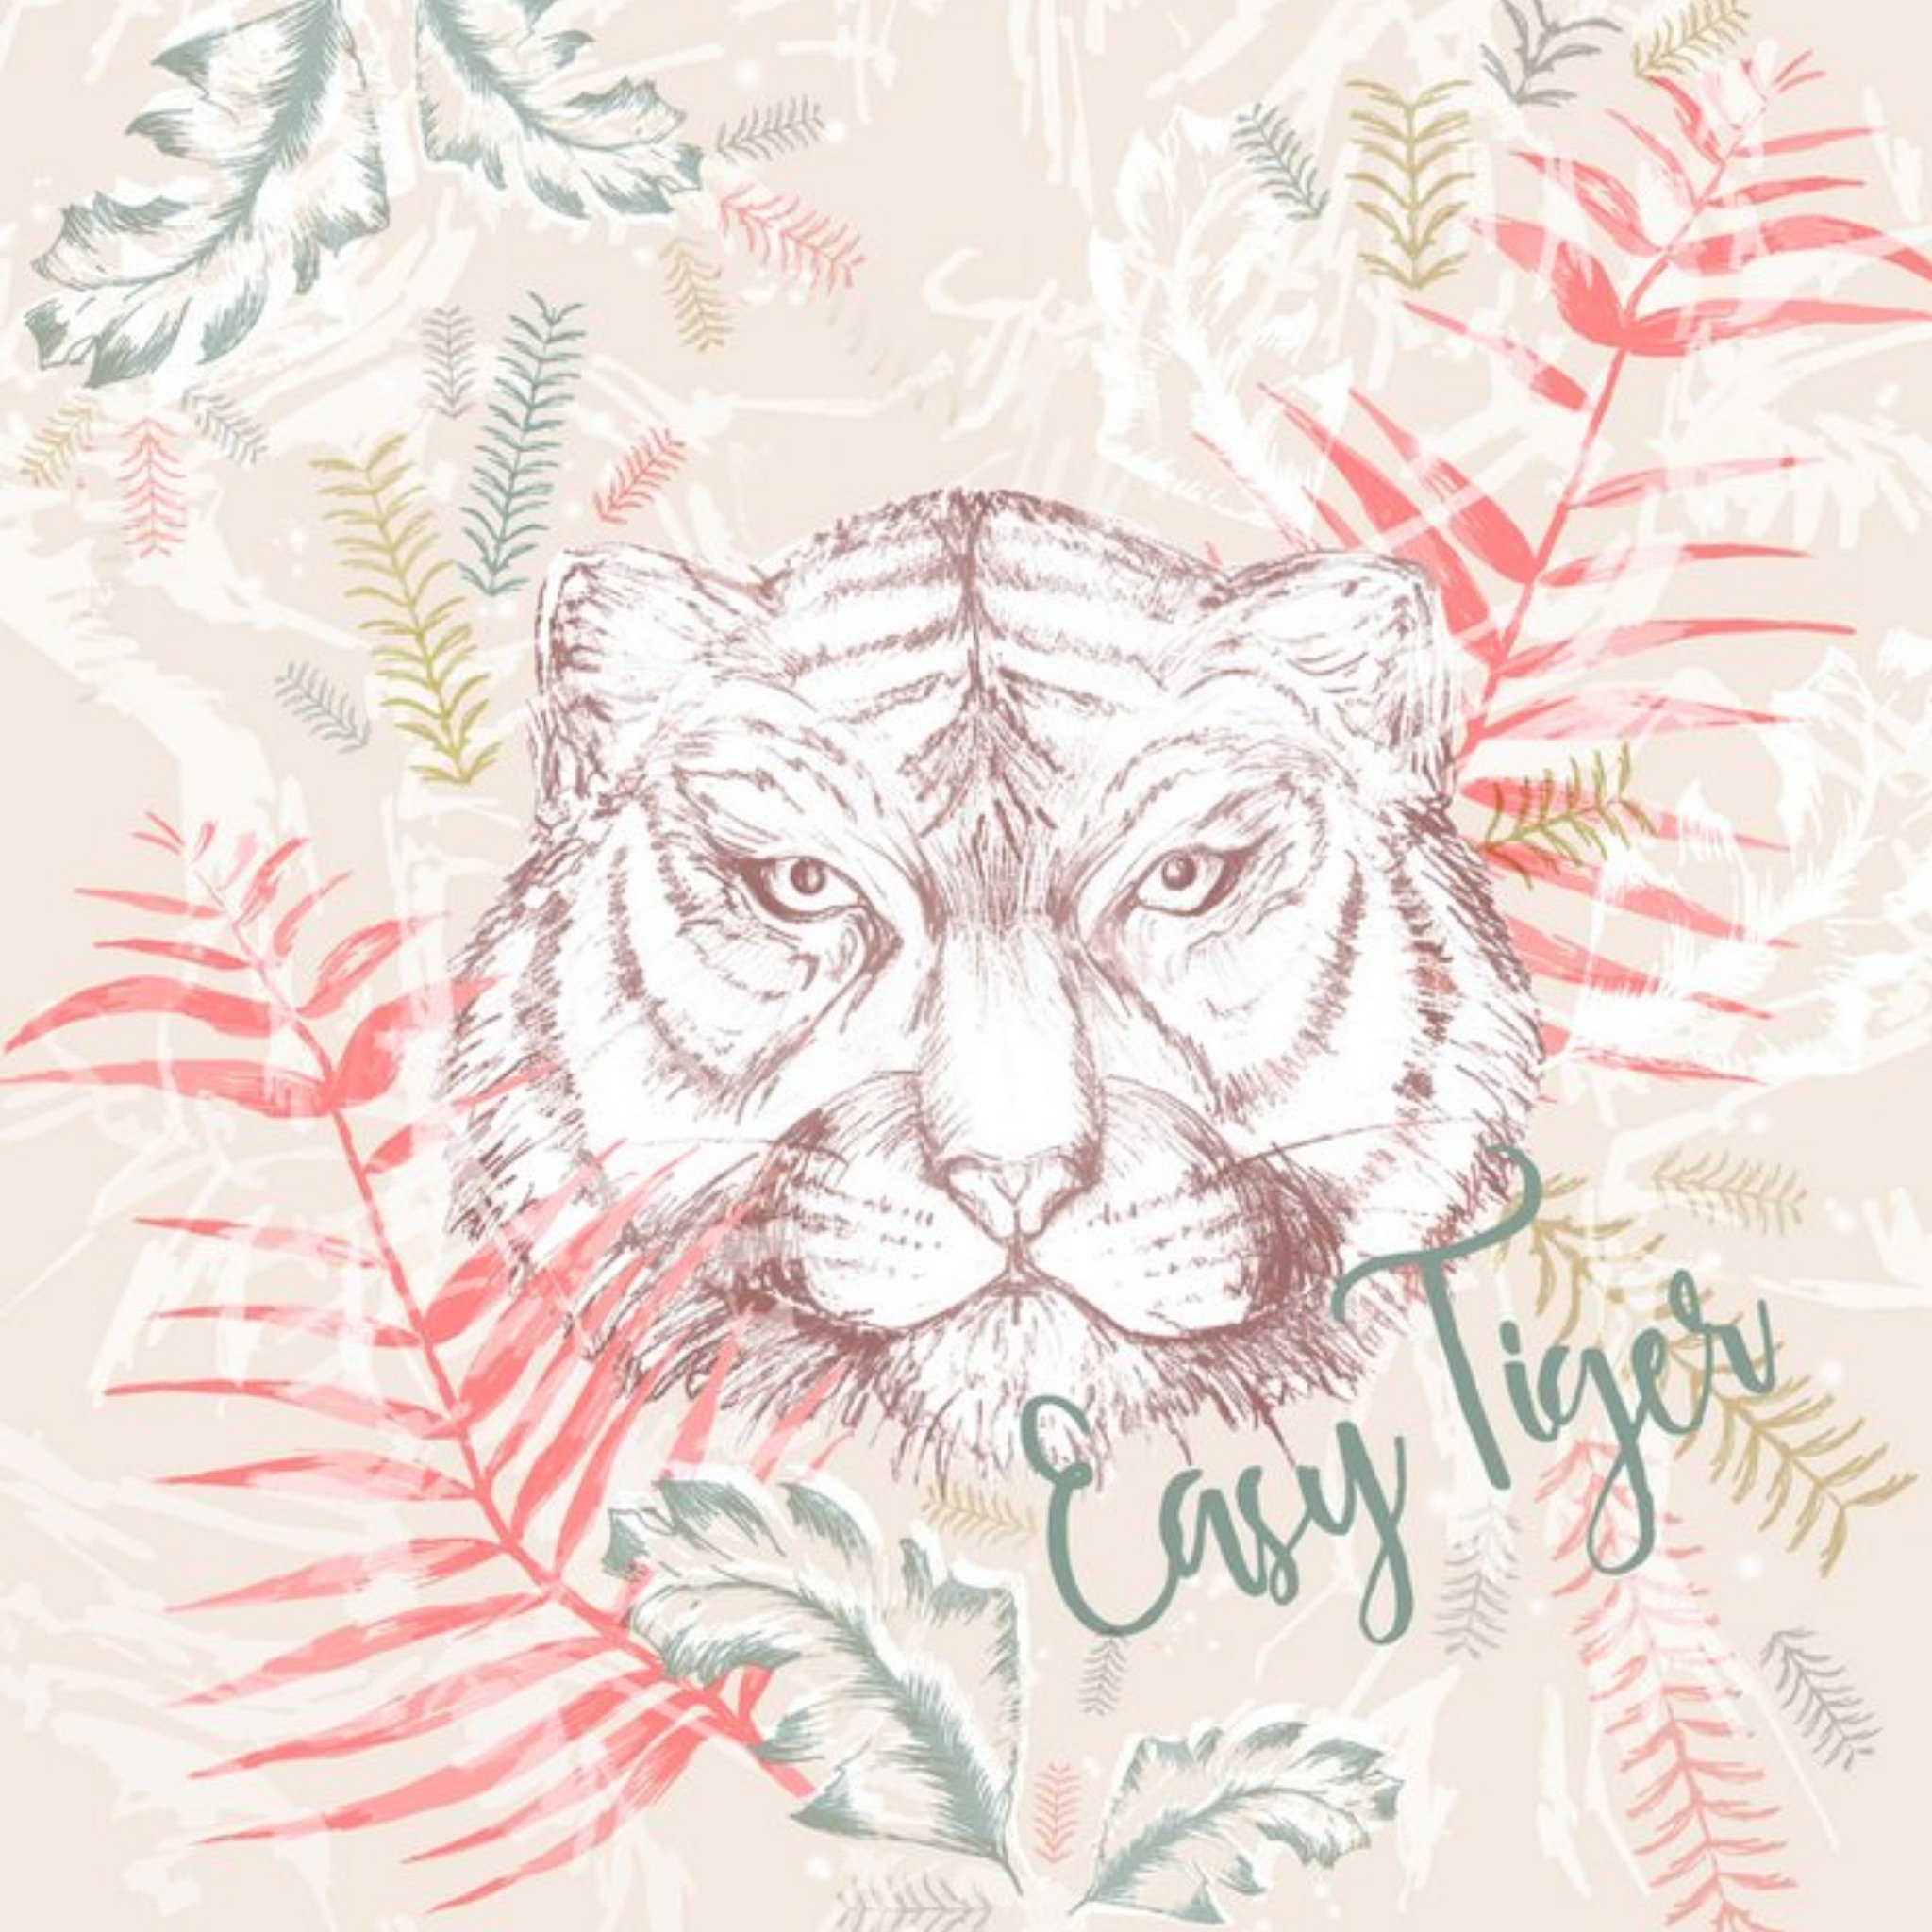 Other Birthday Card - Just A Note - Easy Tiger - Art Card, Square